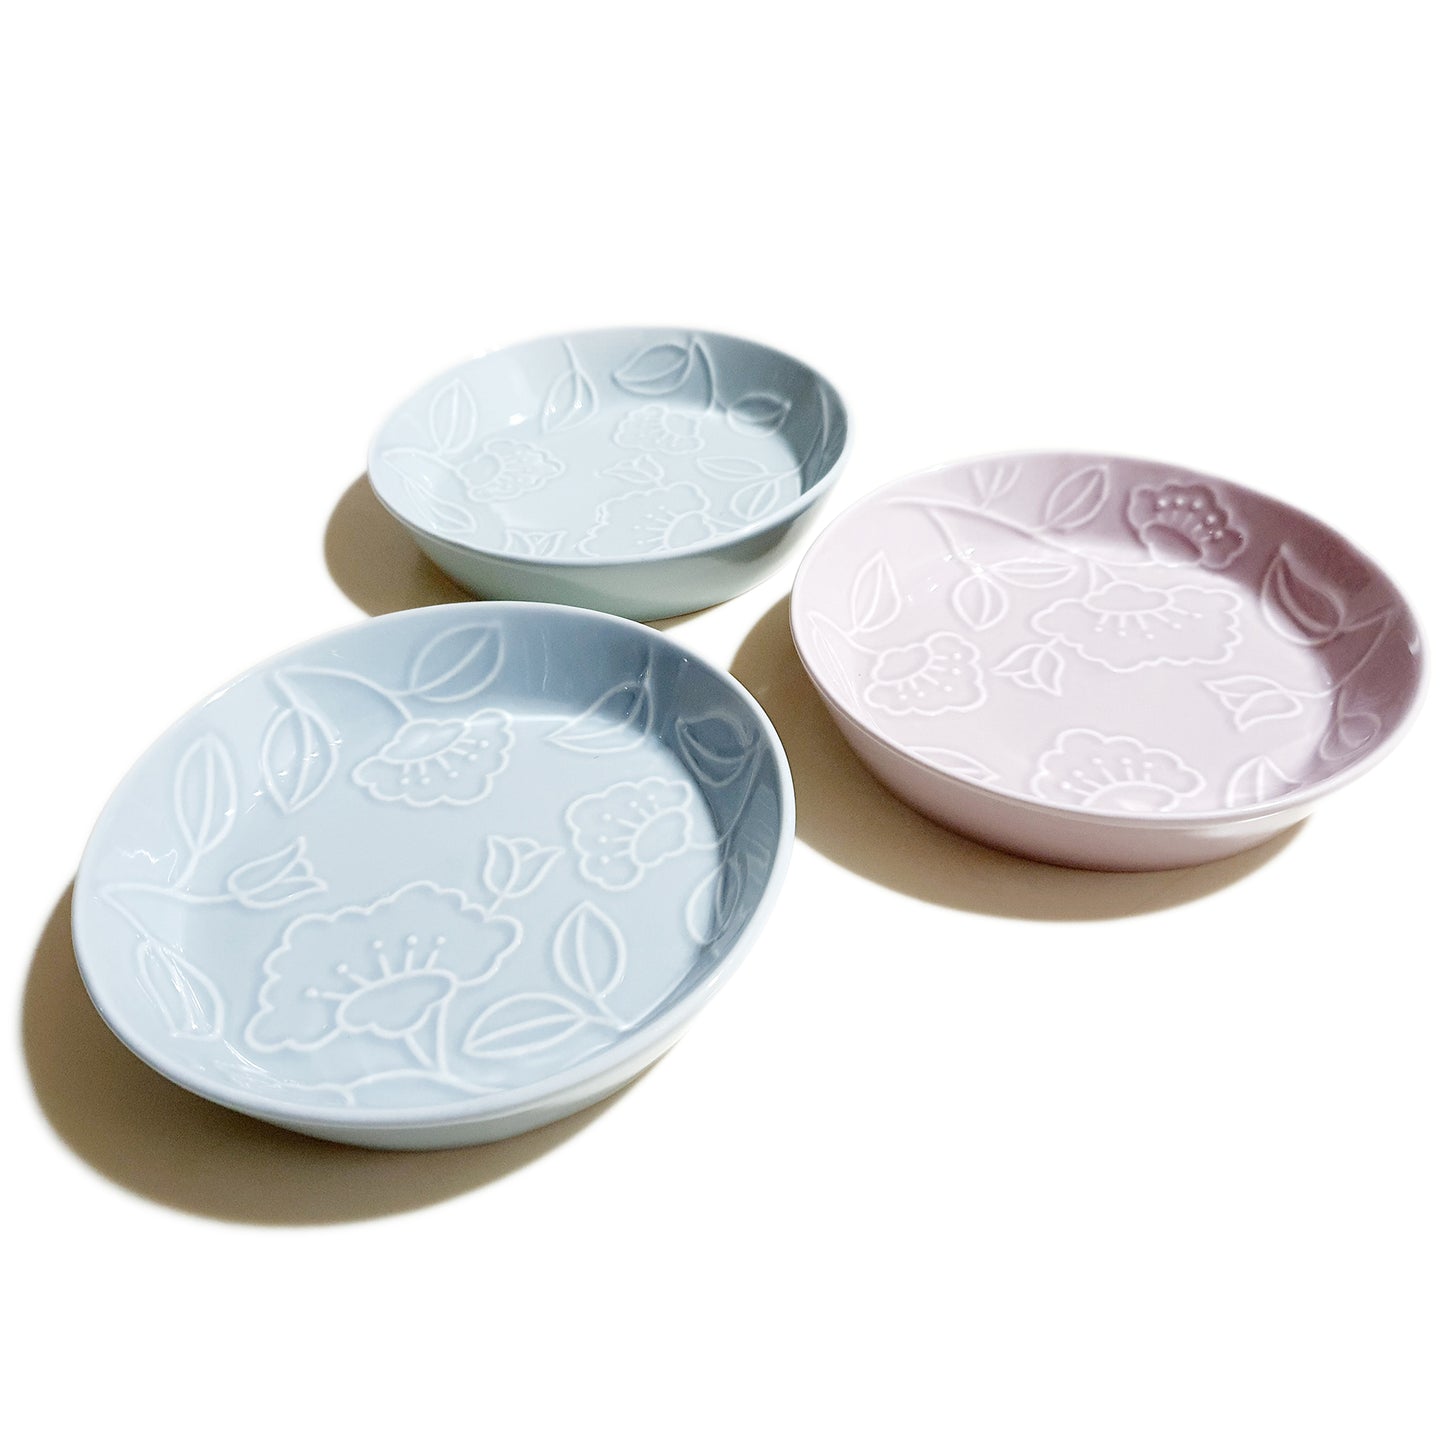 Refreshing Round Plate 148mm (Sky Blue Color) 𝟏𝟓% 𝐎𝐅𝐅